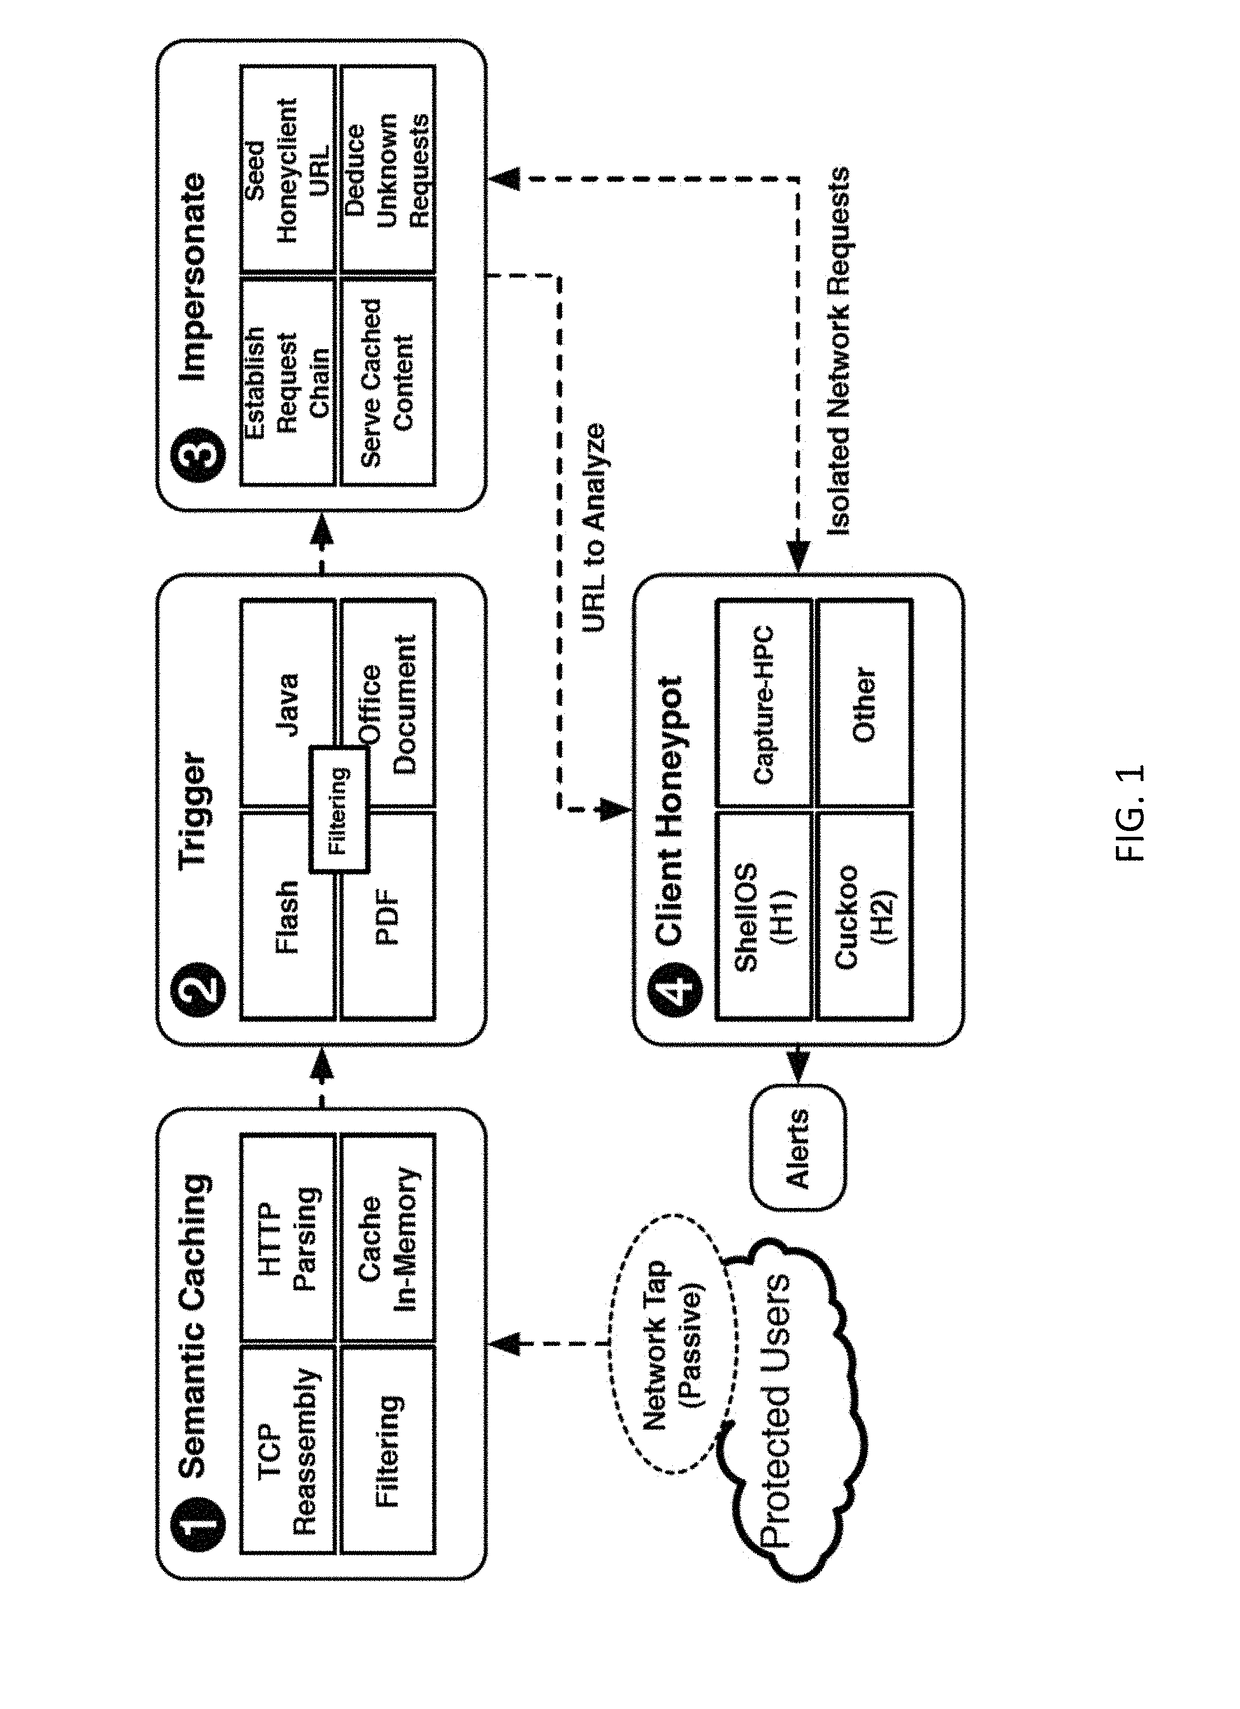 Methods, systems, and computer readable media for detecting malicious network traffic